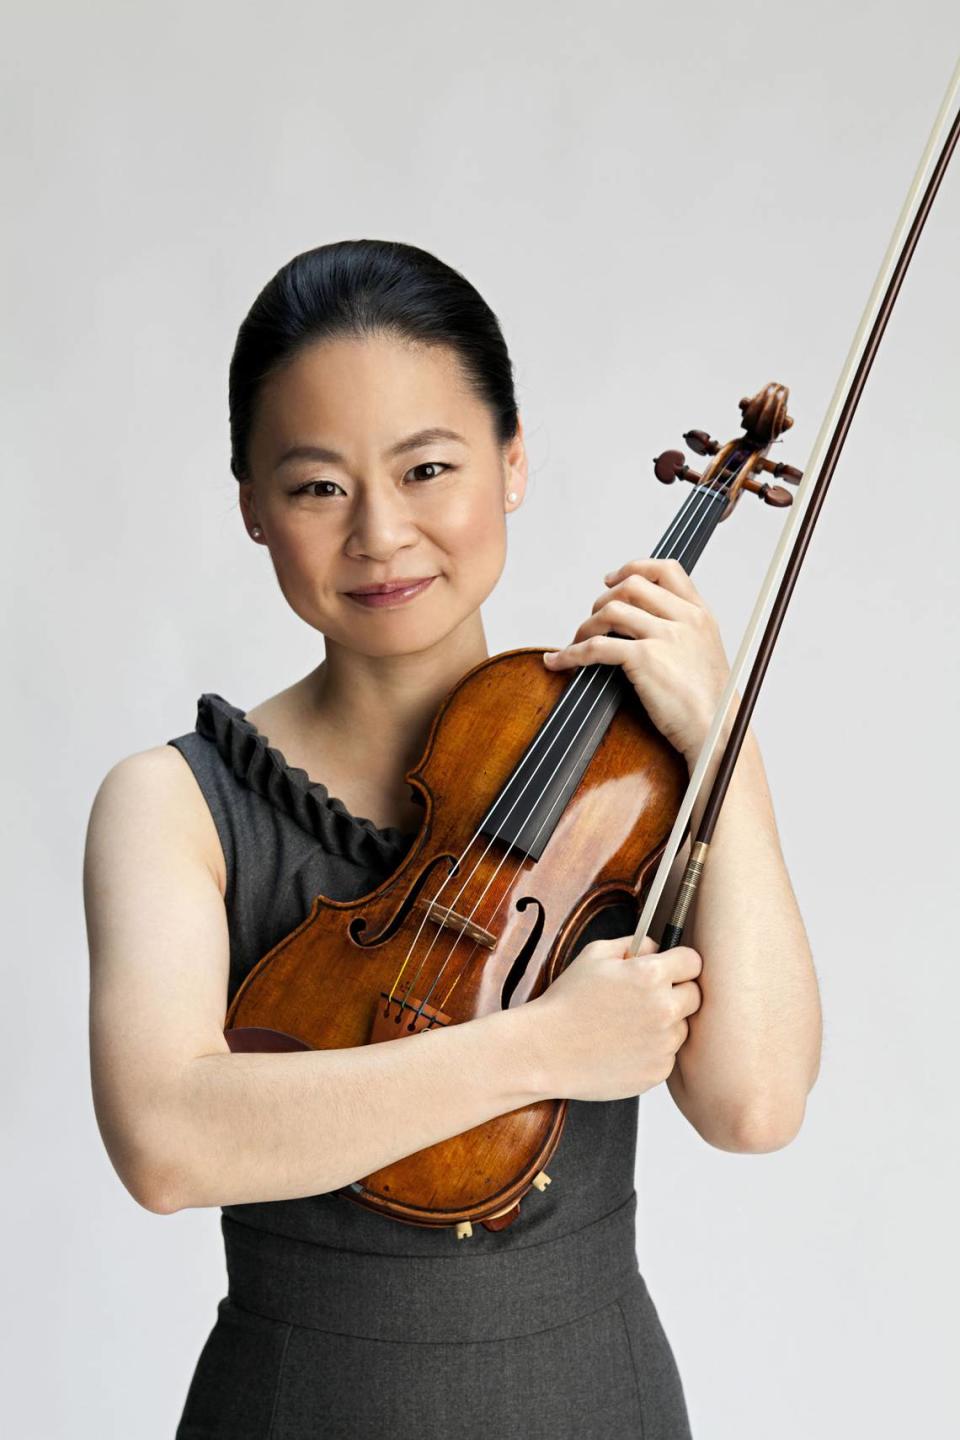 Acclaimed violinist Midori performs at the Kravis Center on April 10.